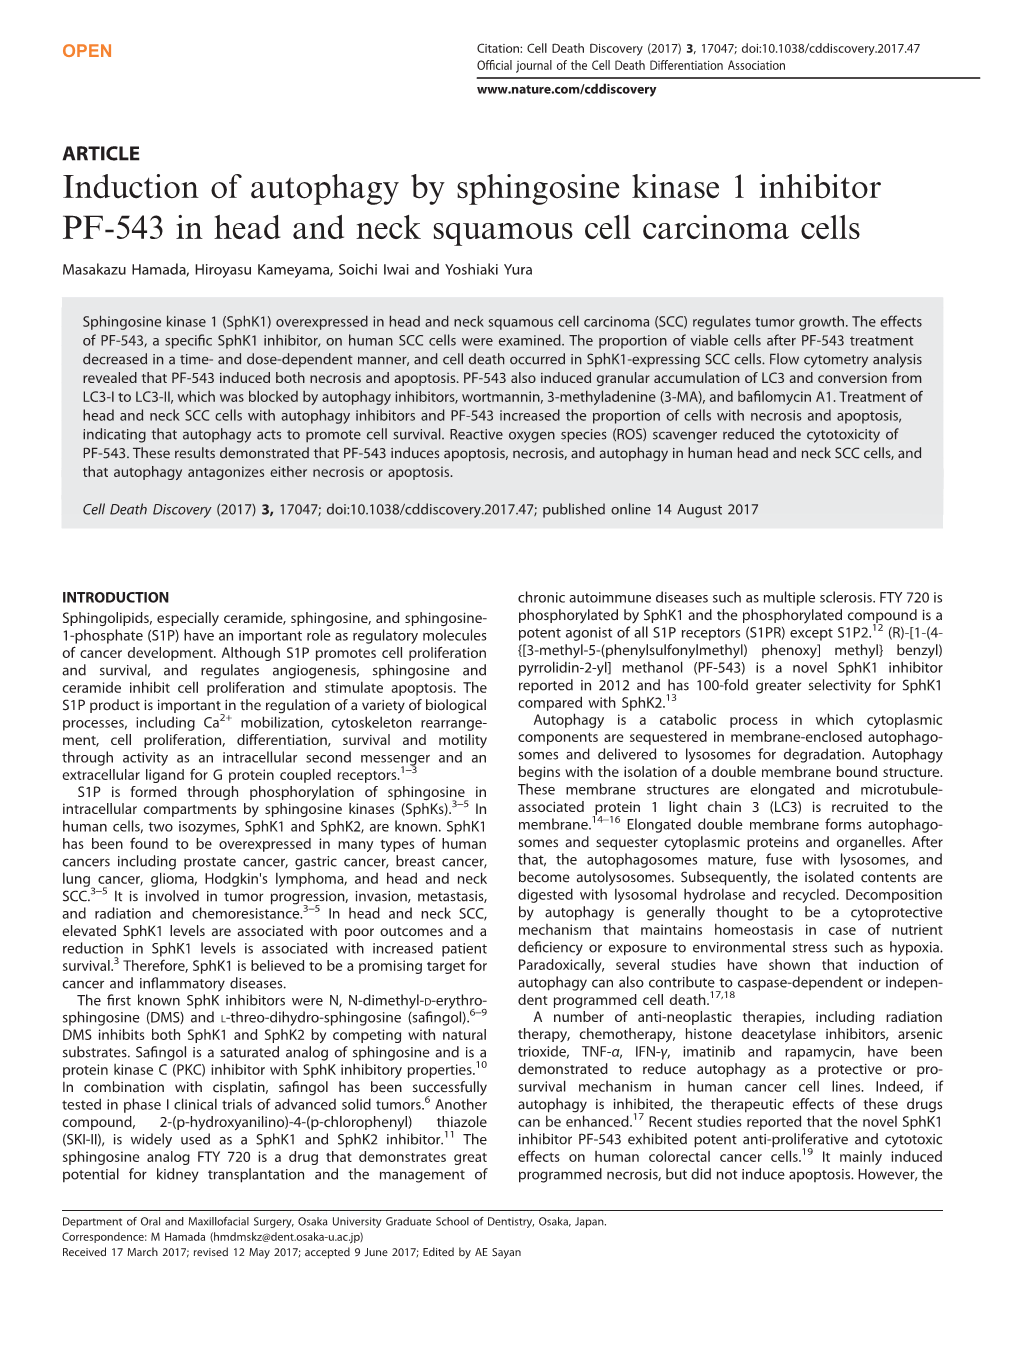 Induction of Autophagy by Sphingosine Kinase 1 Inhibitor PF-543 in Head and Neck Squamous Cell Carcinoma Cells